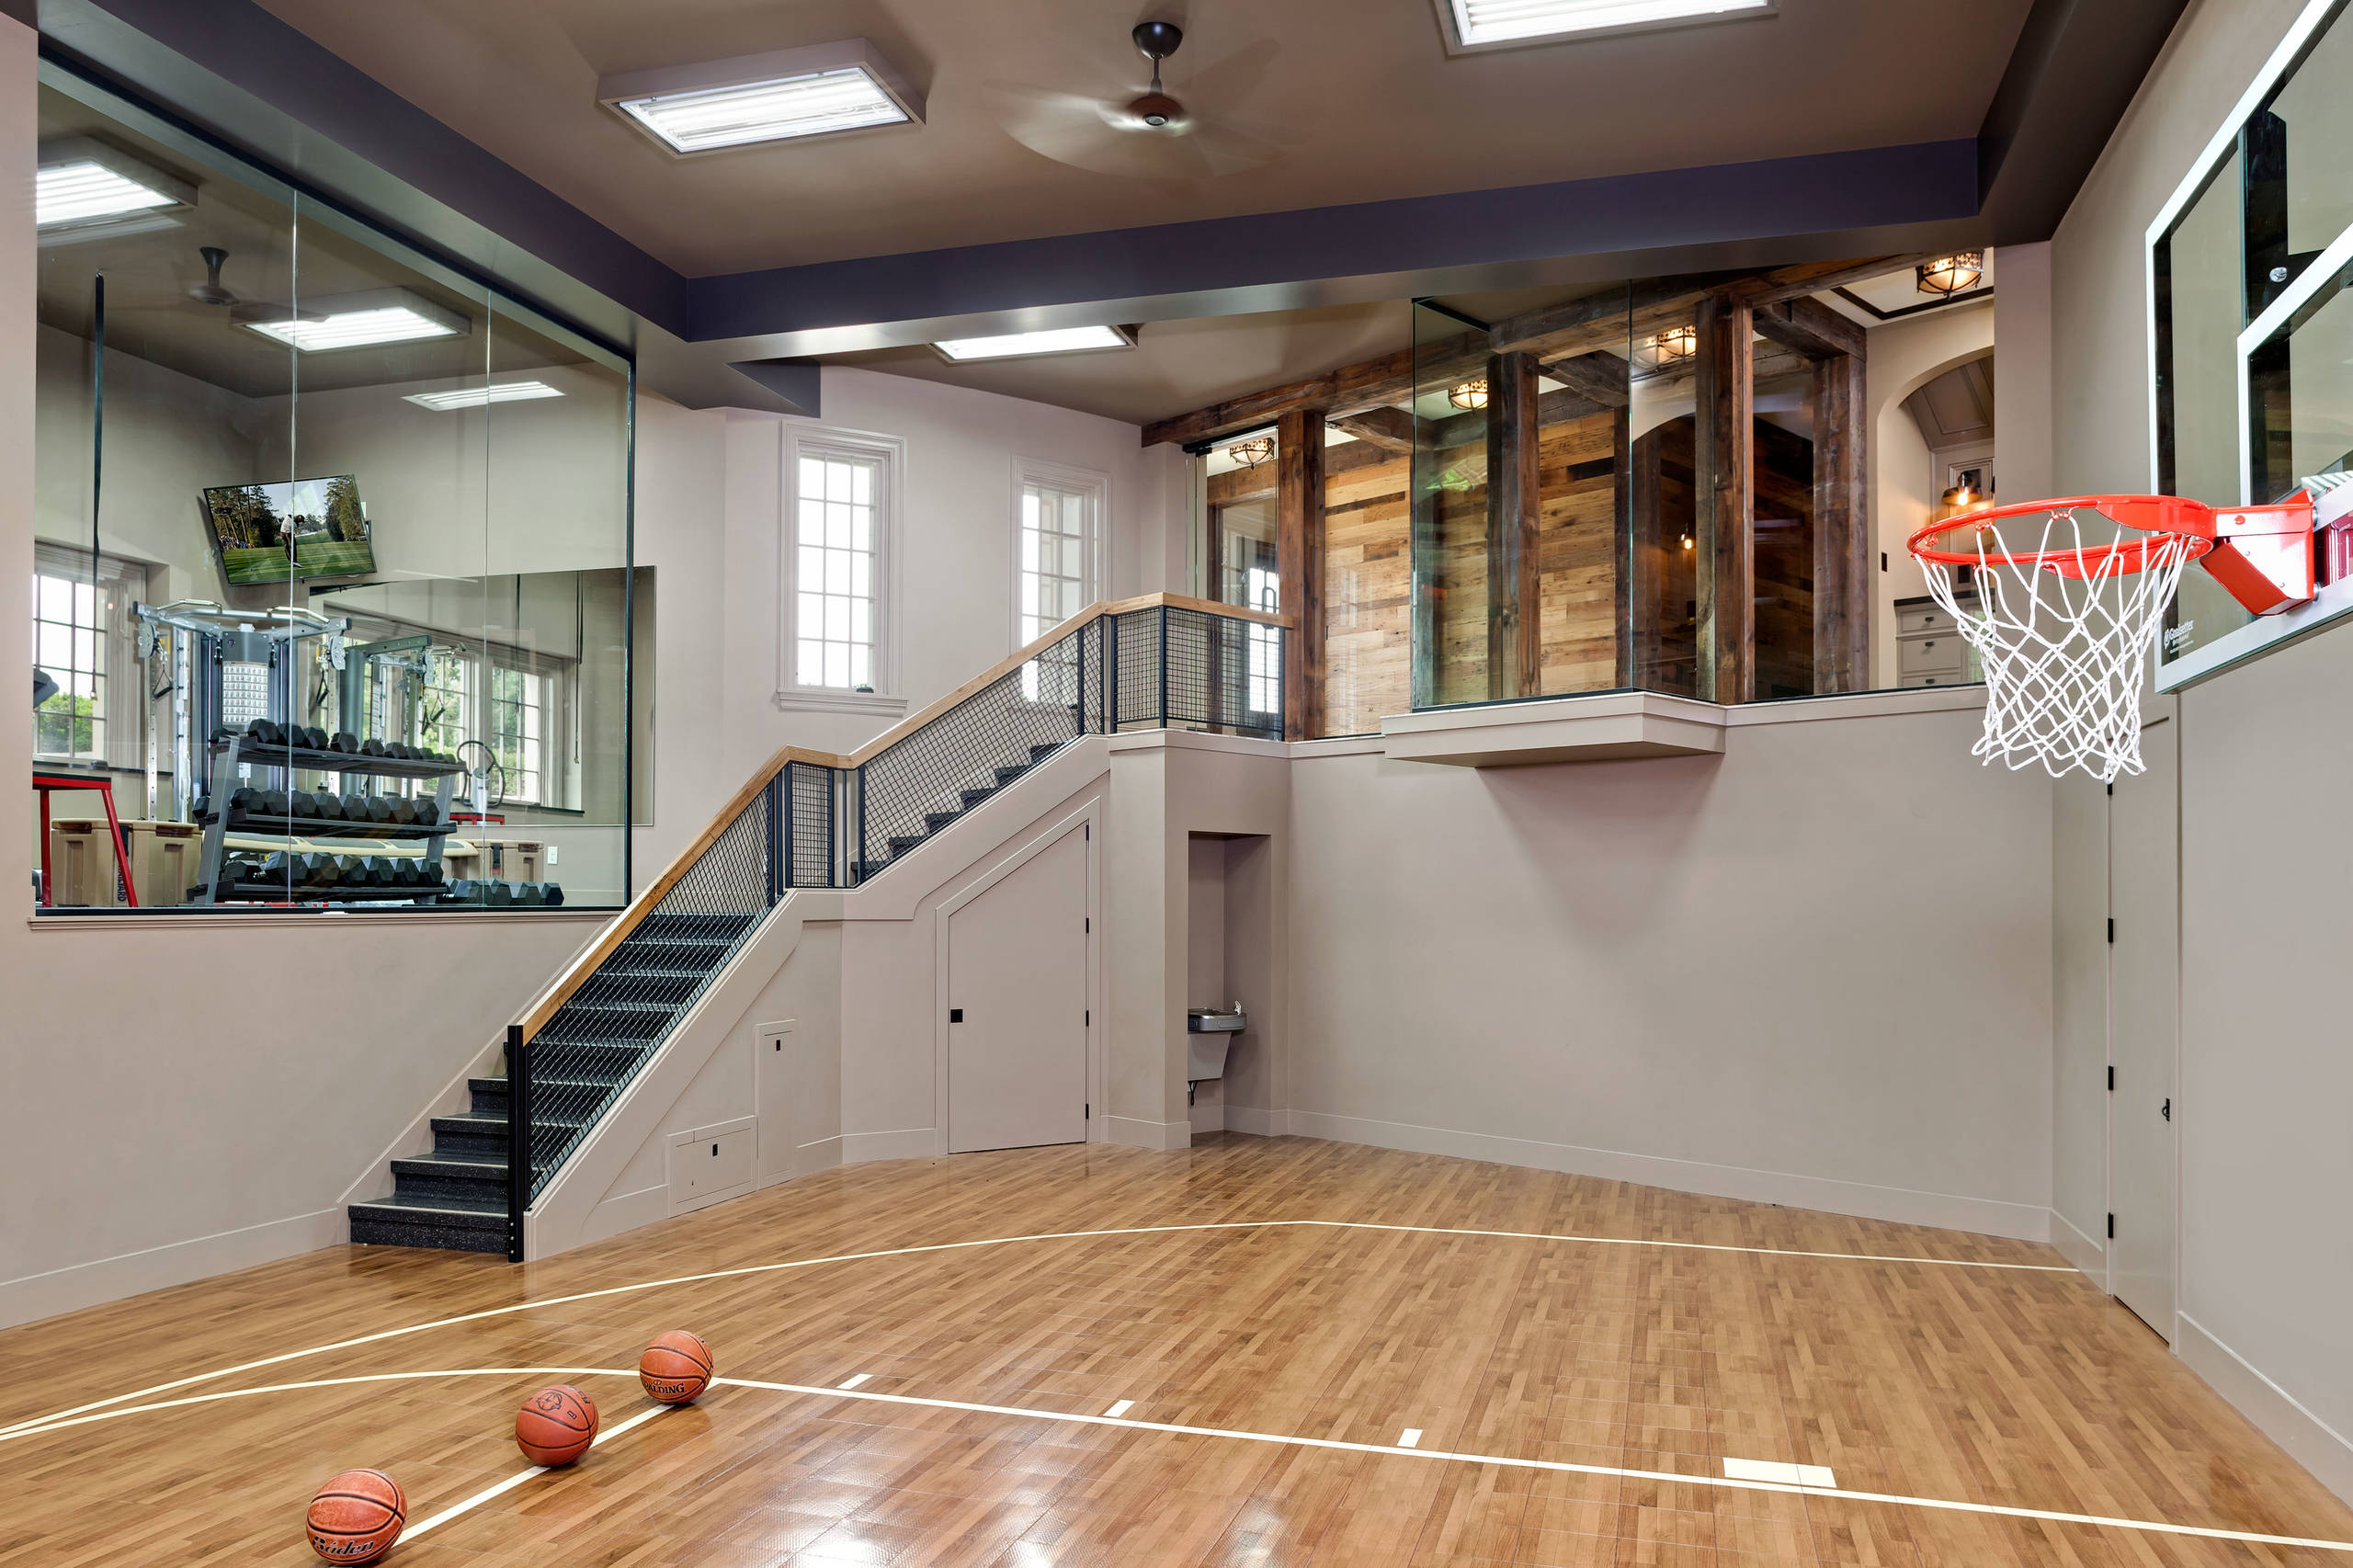 How much does it cost to build an indoor basketball court in your house